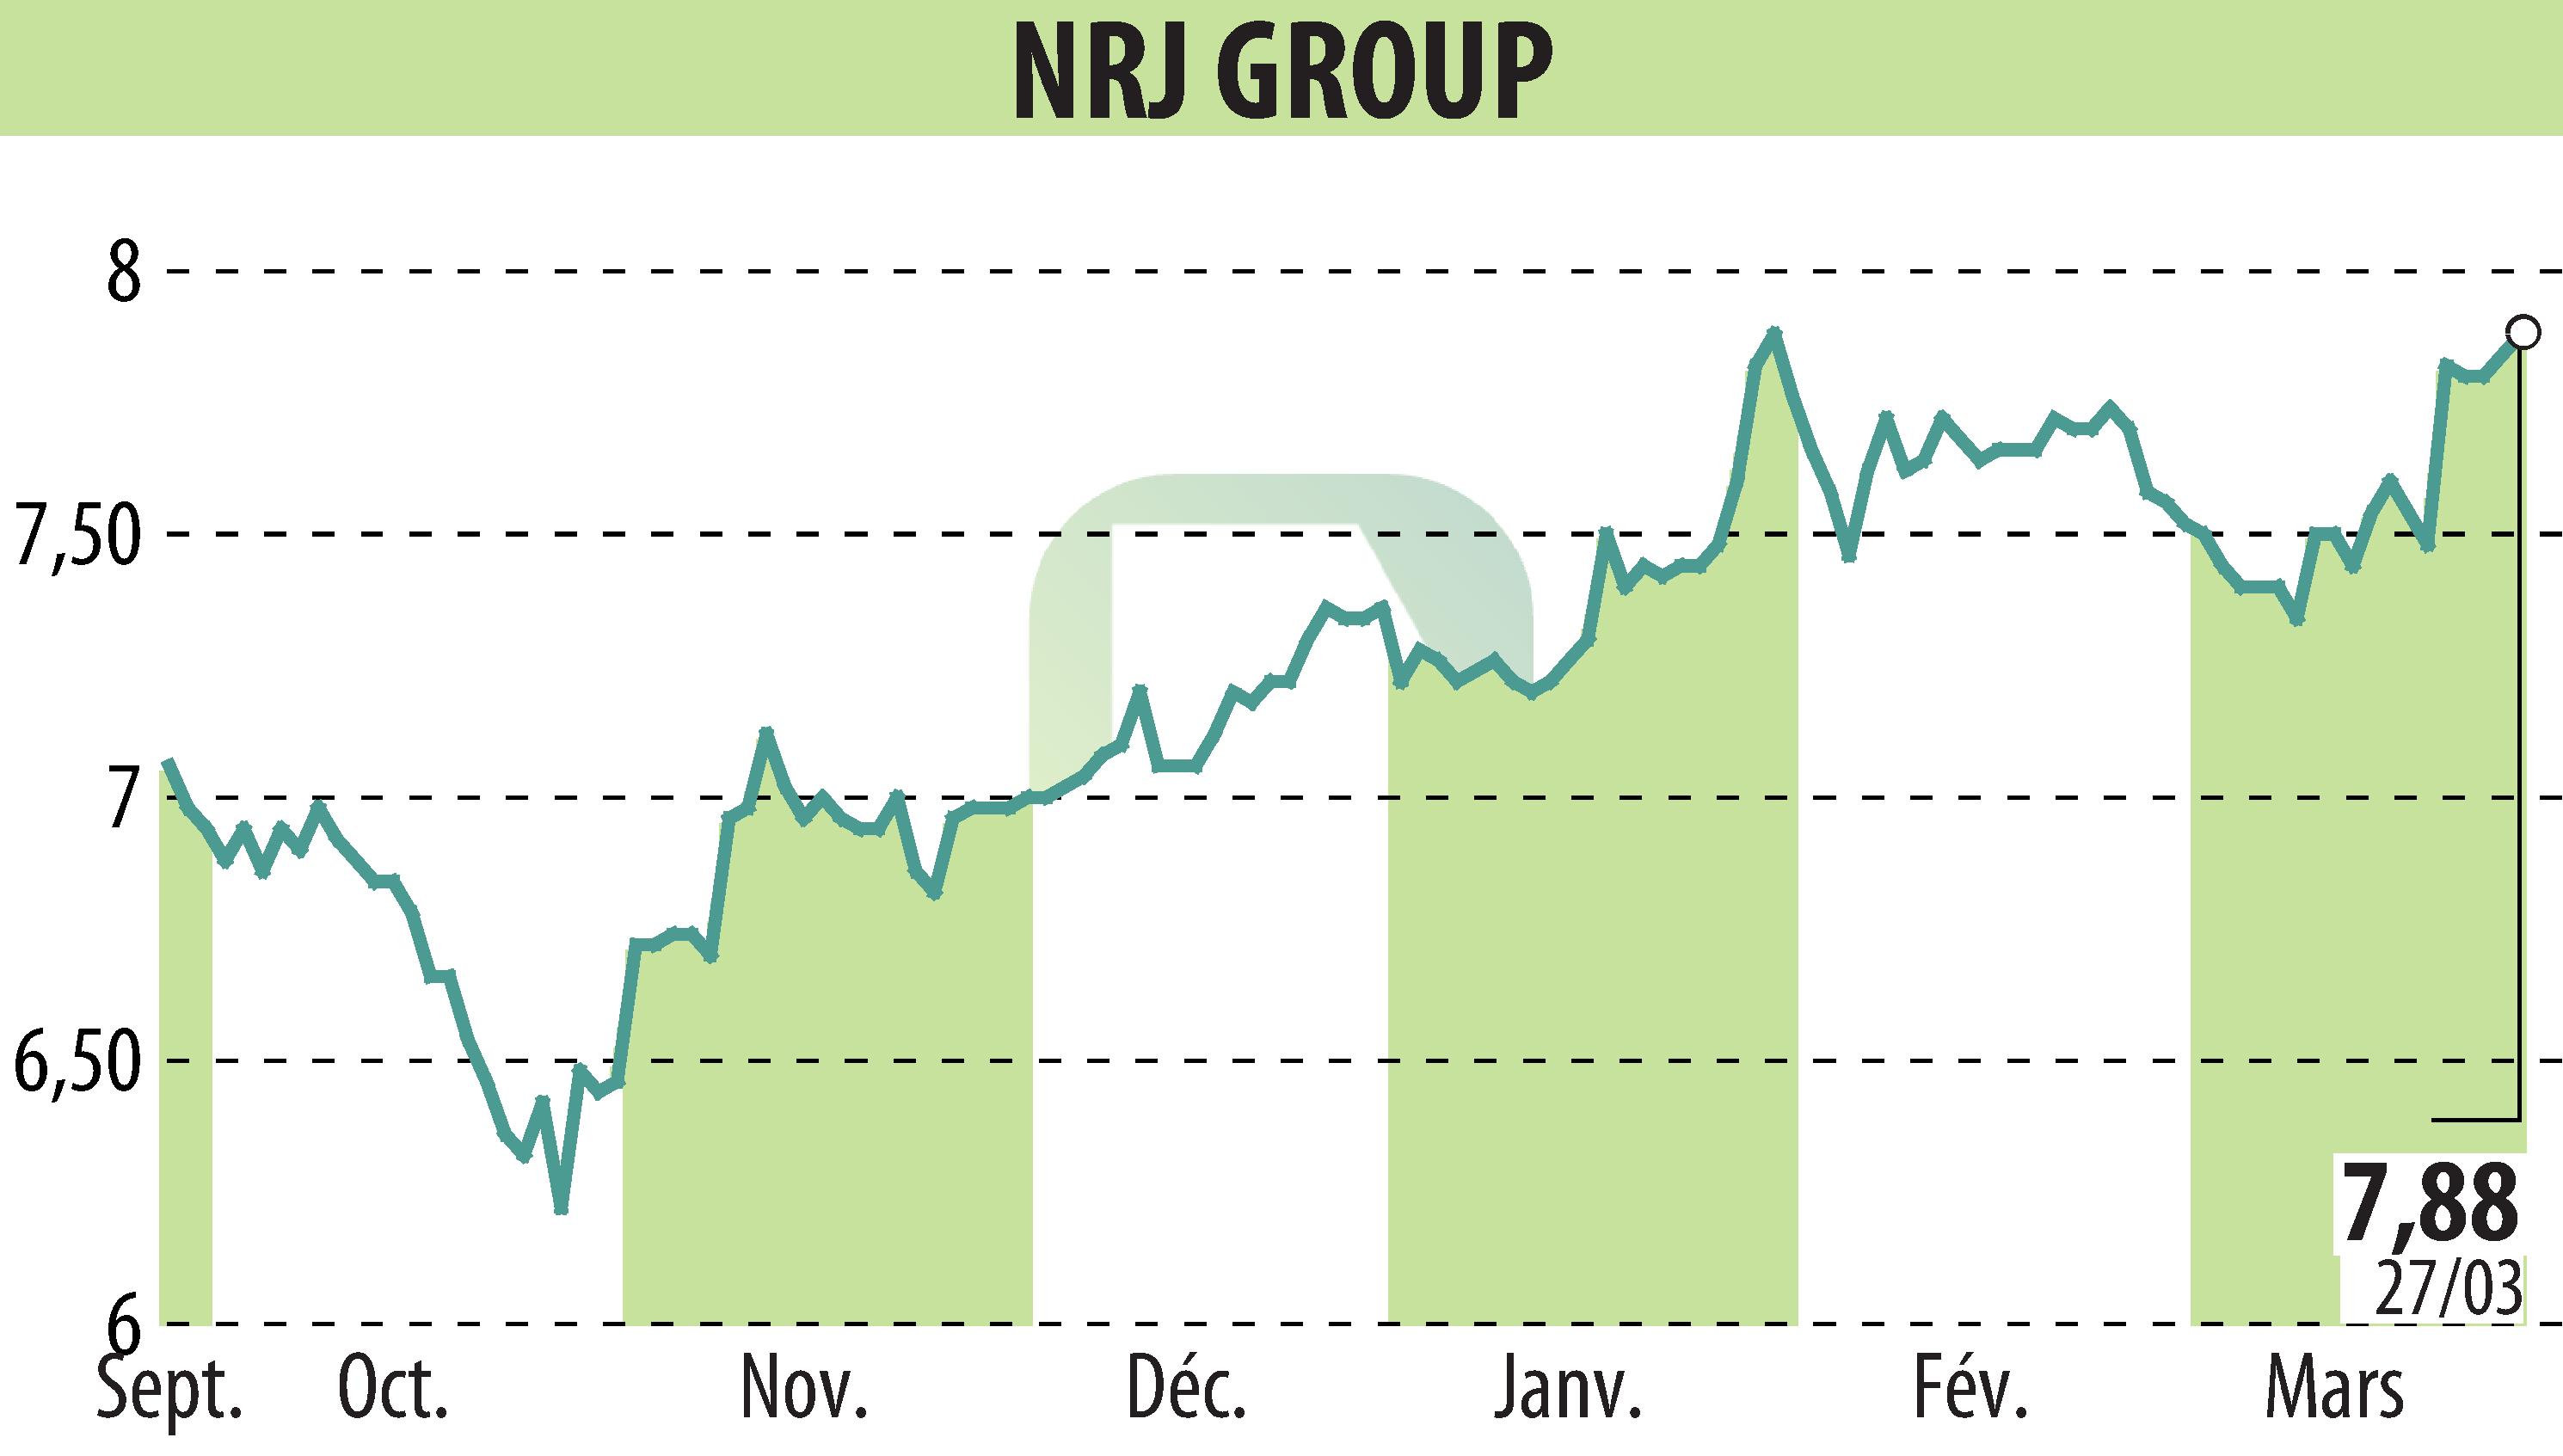 Stock price chart of NRJ GROUP (EPA:NRG) showing fluctuations.